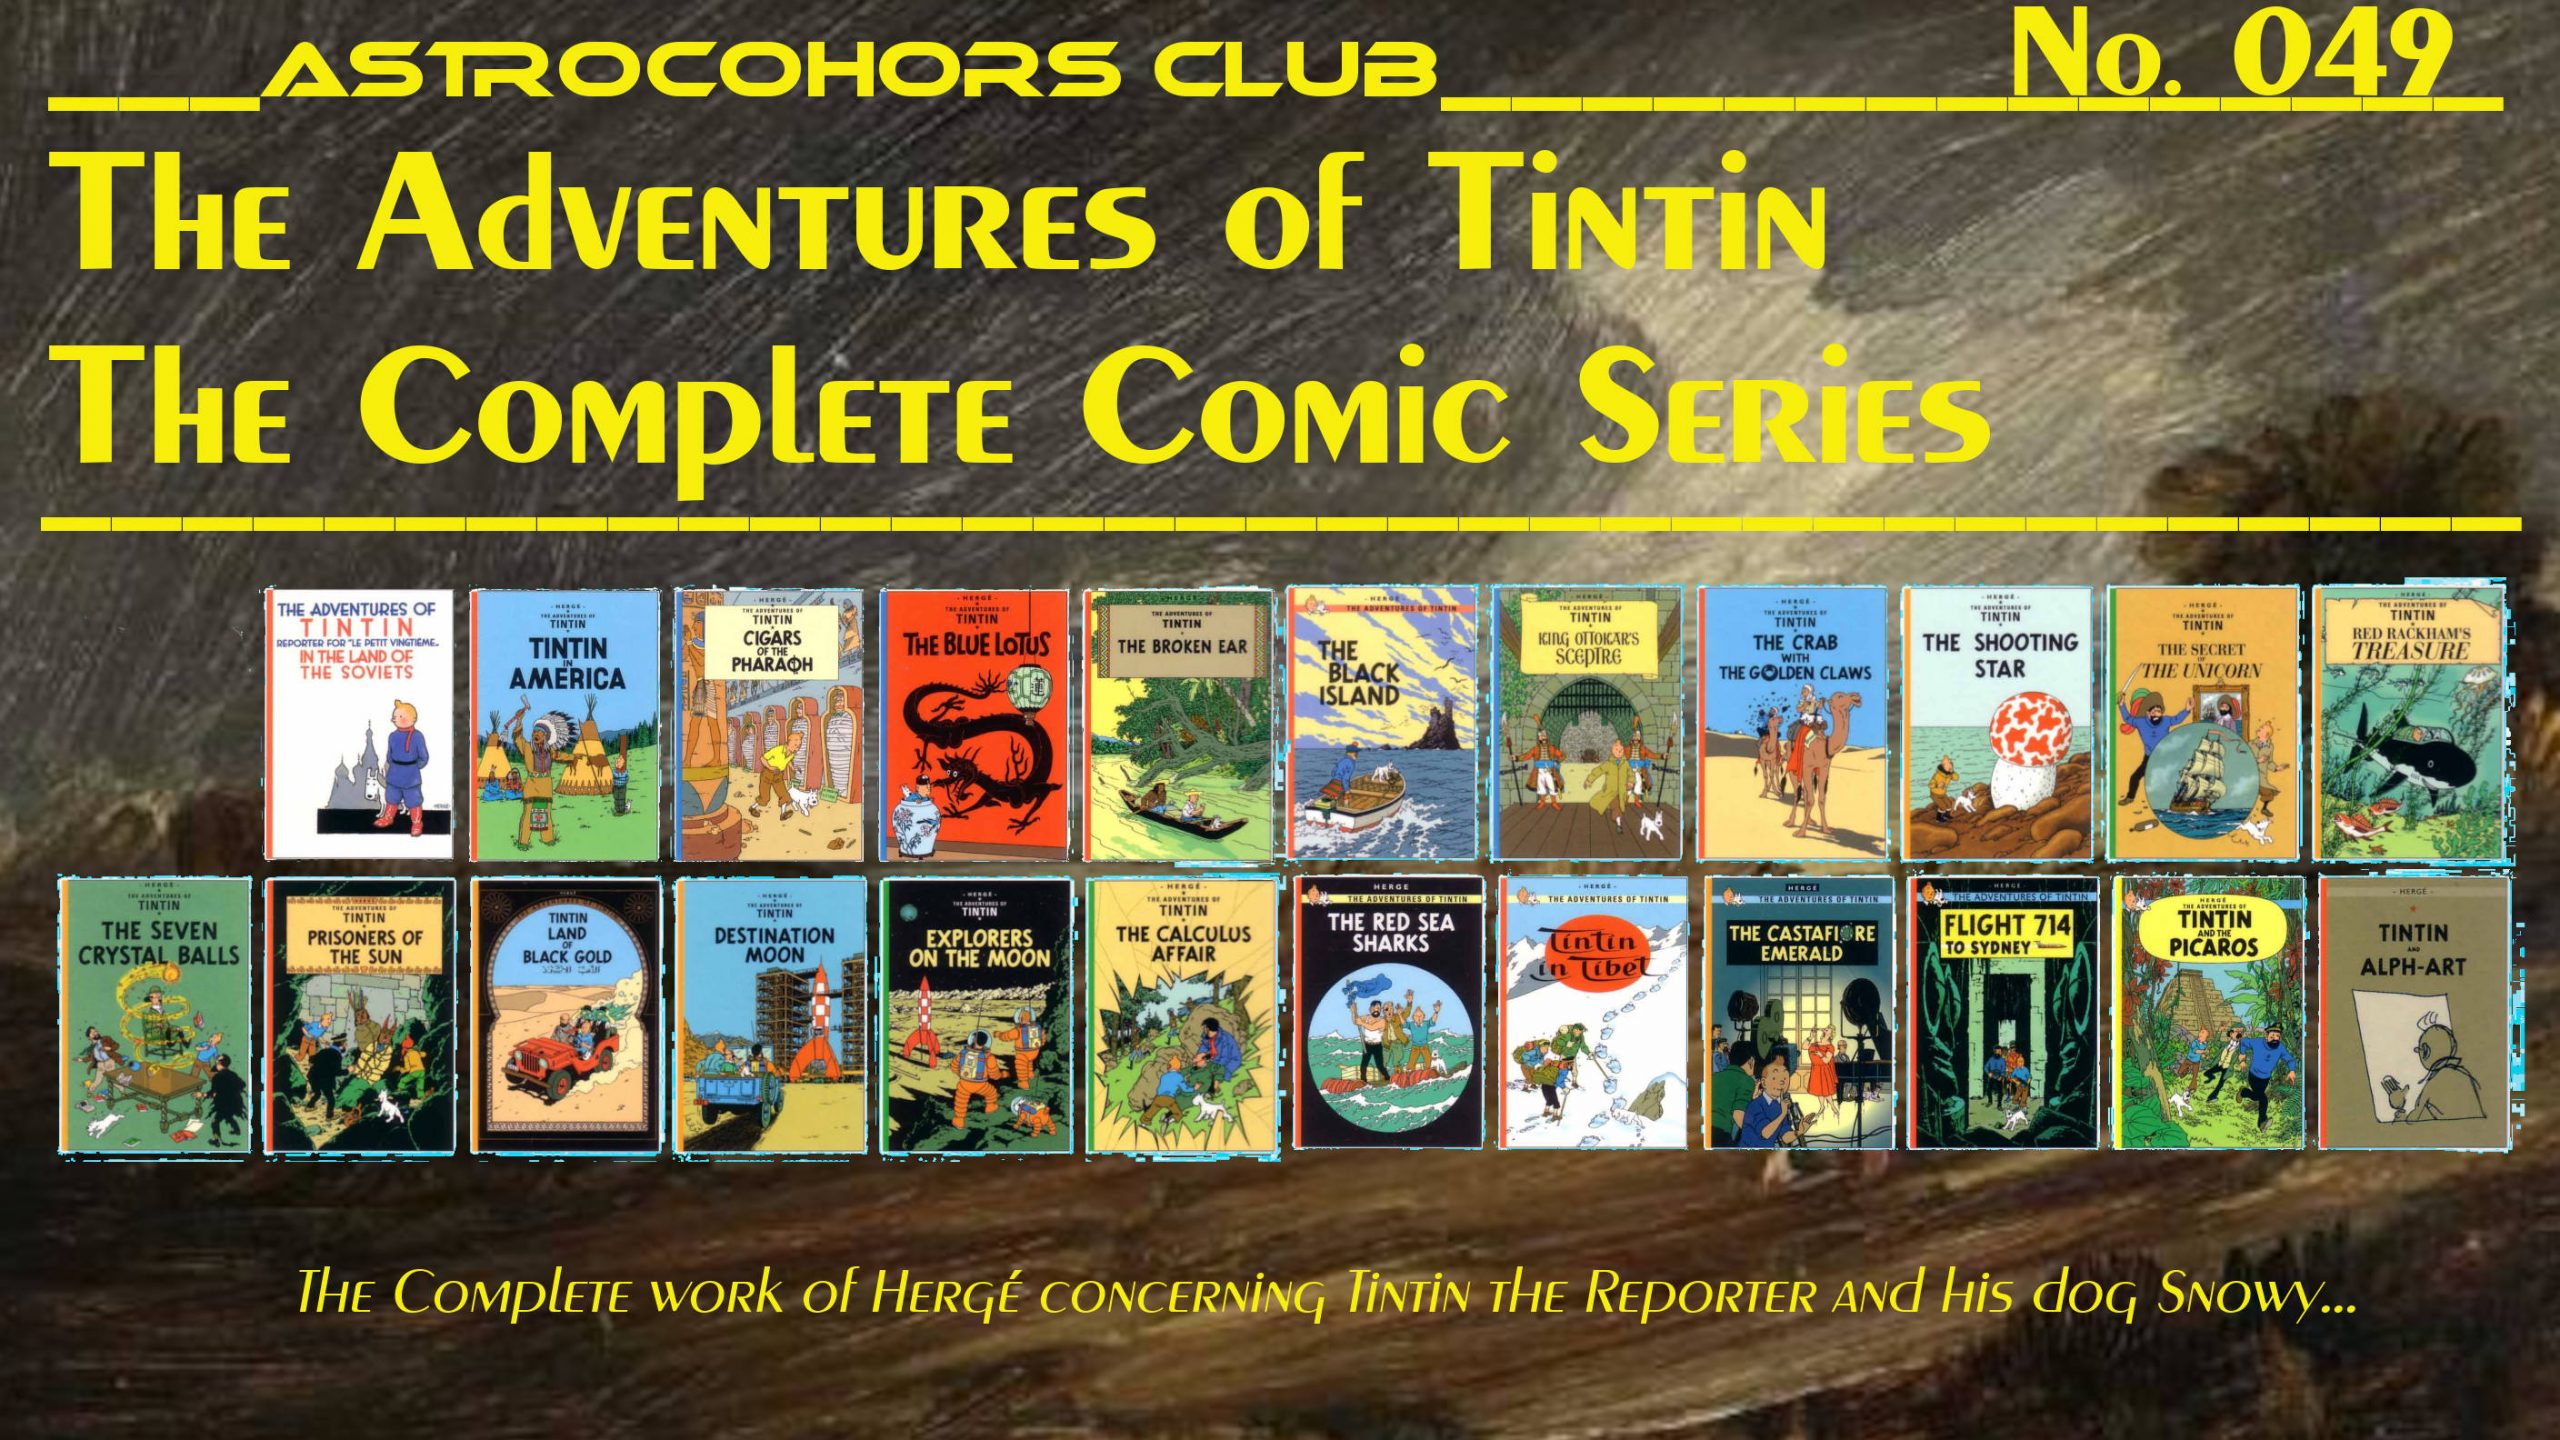 ASTROCOHORS CLUB No. 049: The Adventures of Tintin – The Complete Comic Series